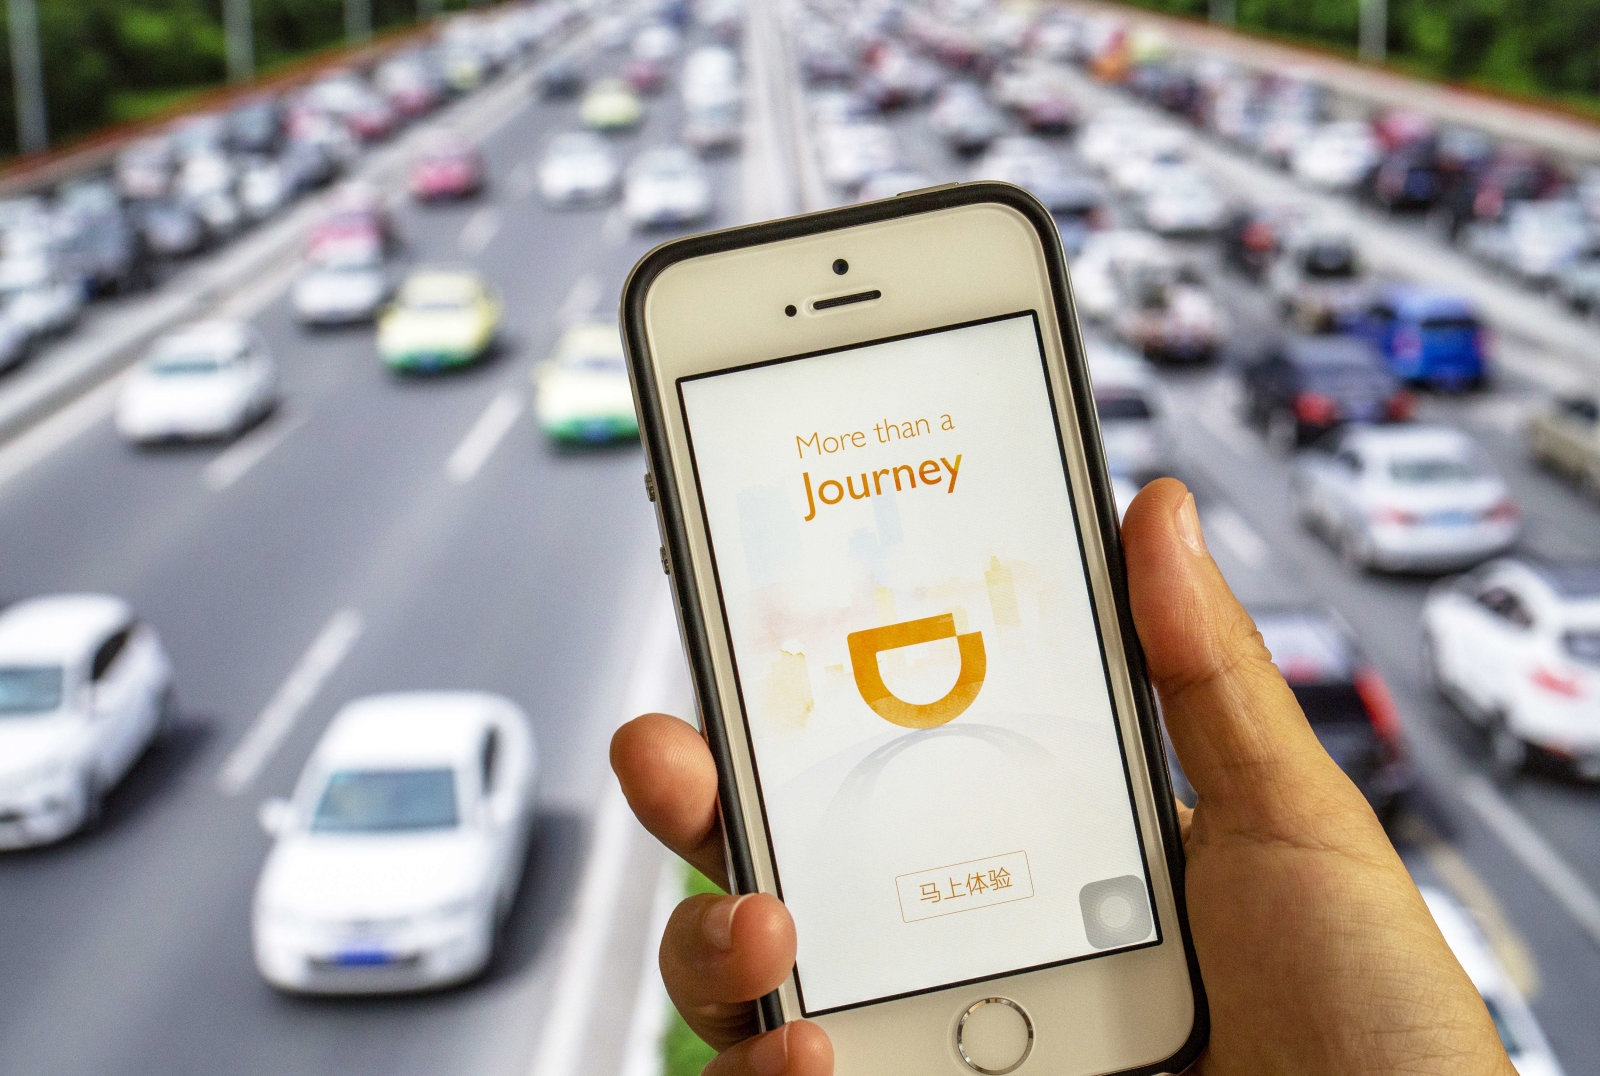 China’s ride-hailing service Didi Chuxing recruits drivers in Mexico | DeviceDaily.com